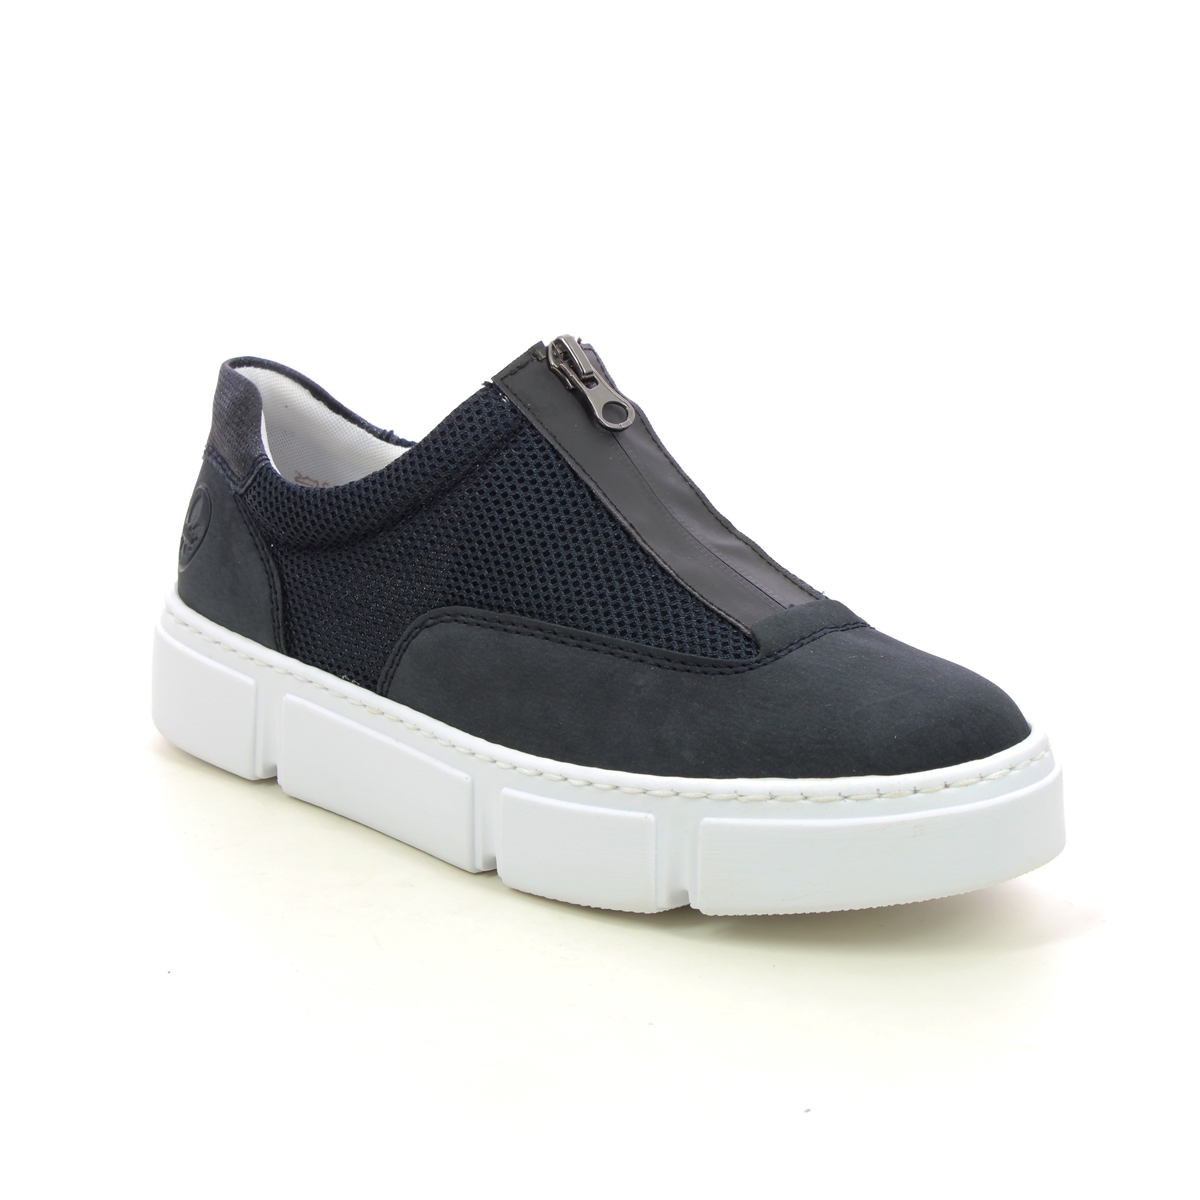 Rieker N5964-14 Navy Womens trainers in a Plain Man-made in Size 41